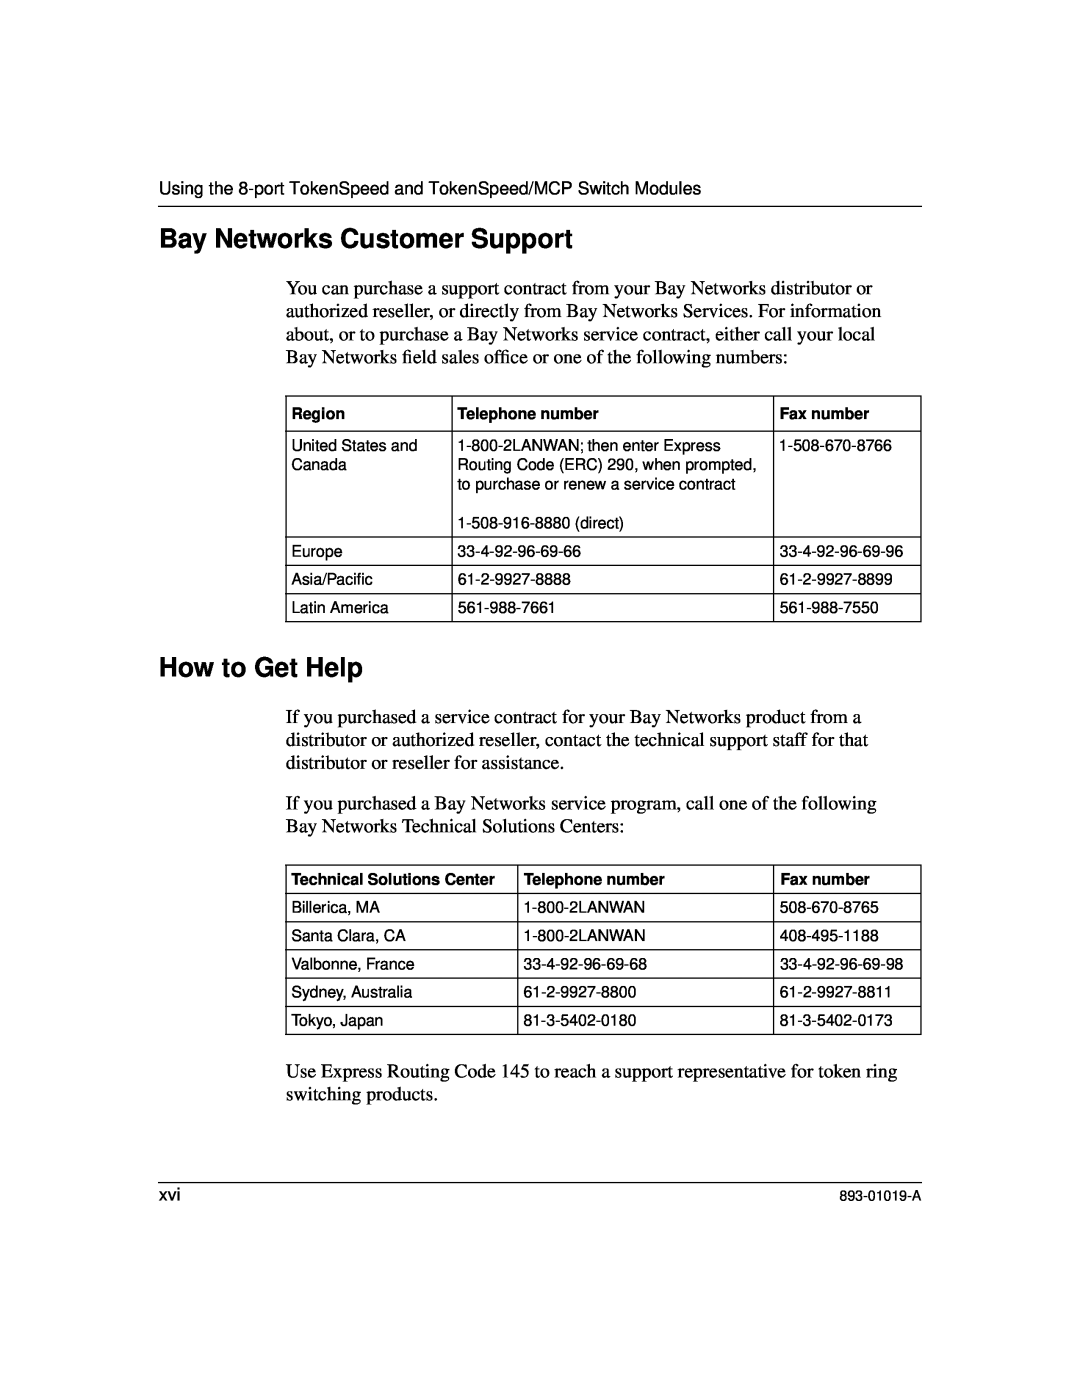 Nortel Networks 5000BH manual Bay Networks Customer Support, How to Get Help 